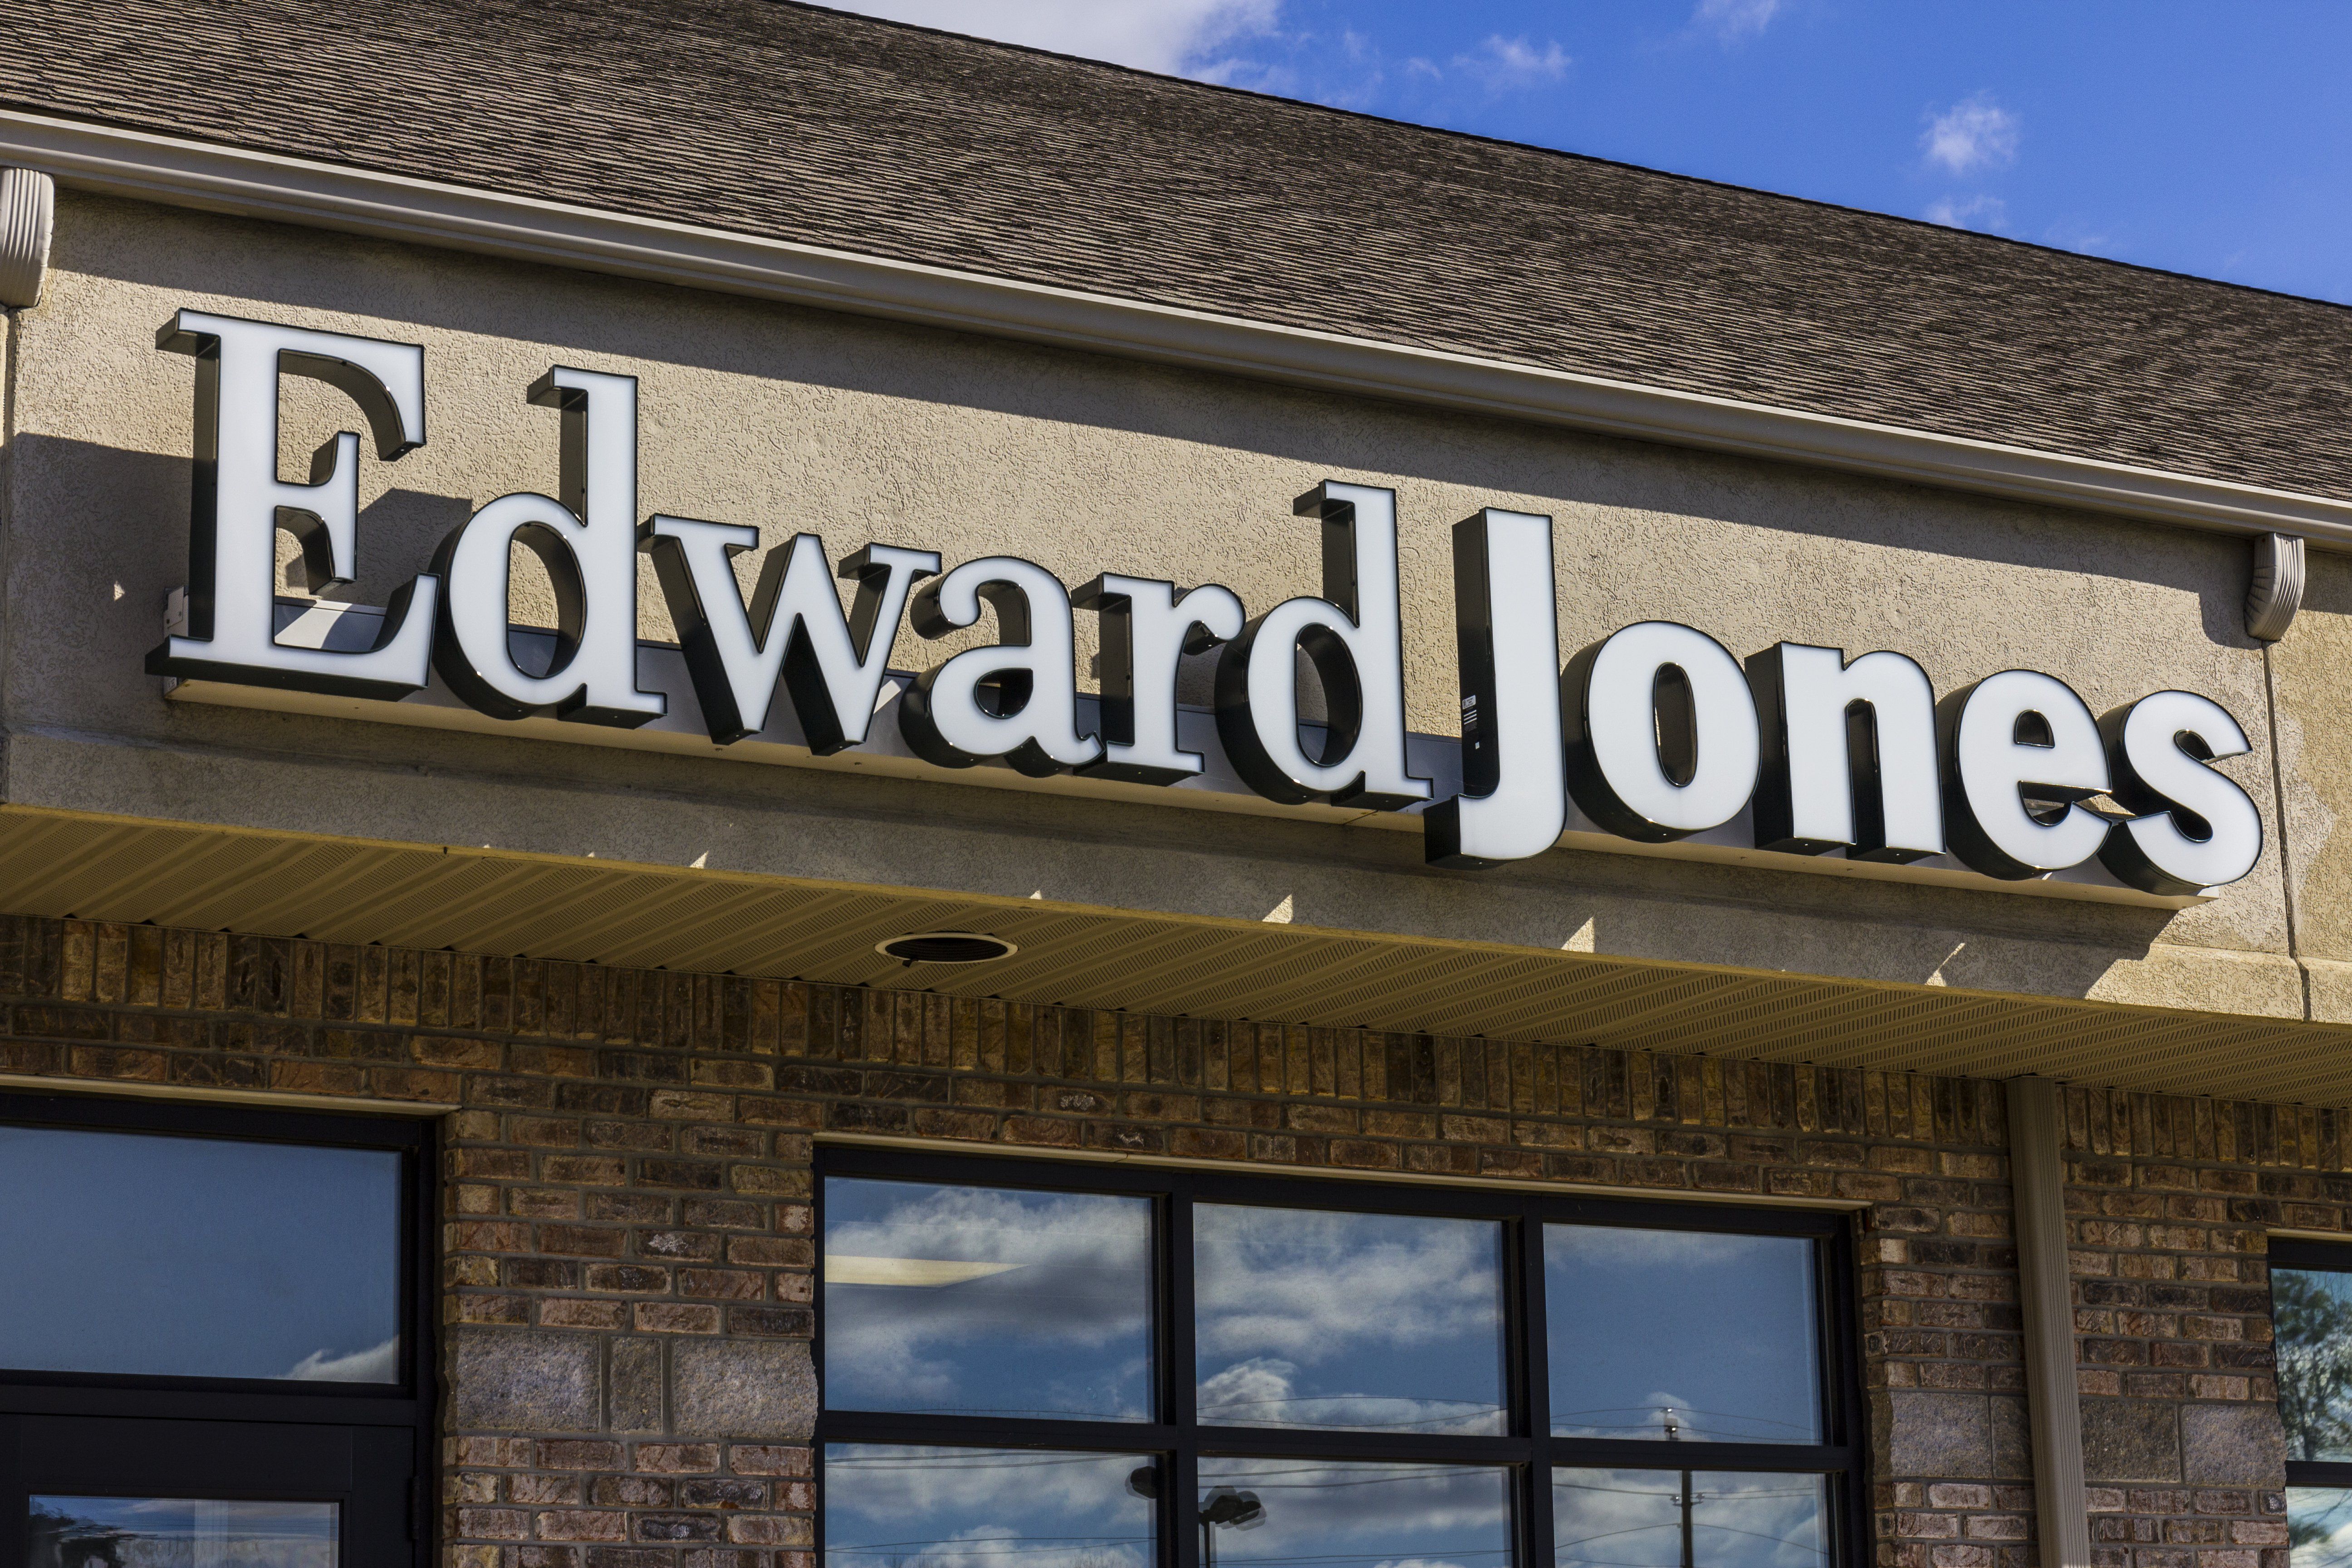 Edward Jones Consumer Investment and Financial Services Firm Location I